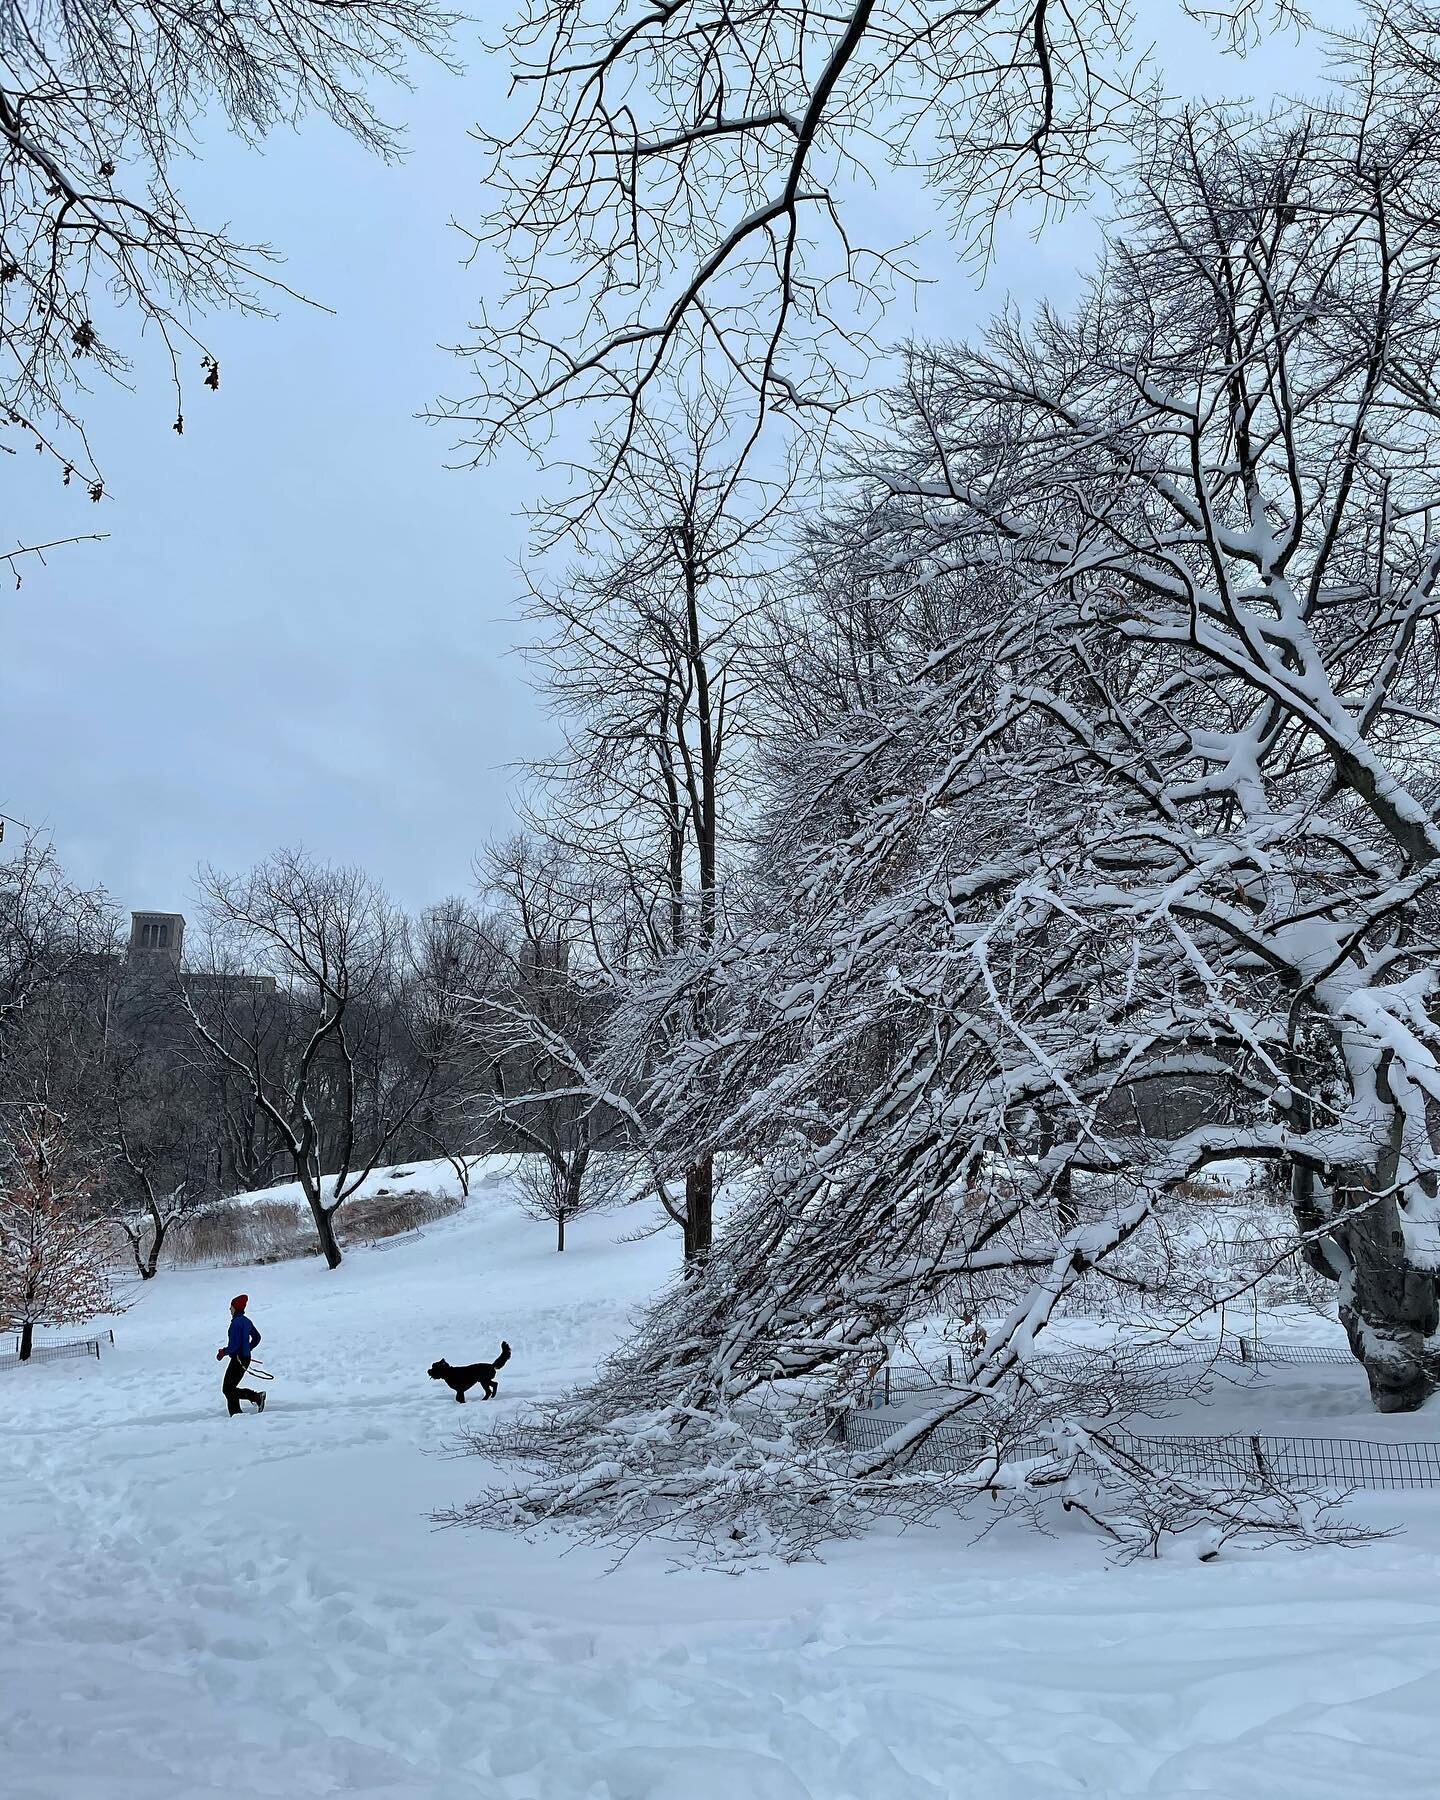 Leaving evidence that I did actually leave the apartment and experience the snow (storm?) on Tuesday (2020.02.02). ❄️
Went on an early morning walk through @centralparknyc while facetiming my grandma in Shanghai.
.
.
.
#snowinnyc #centralparknyc #mor